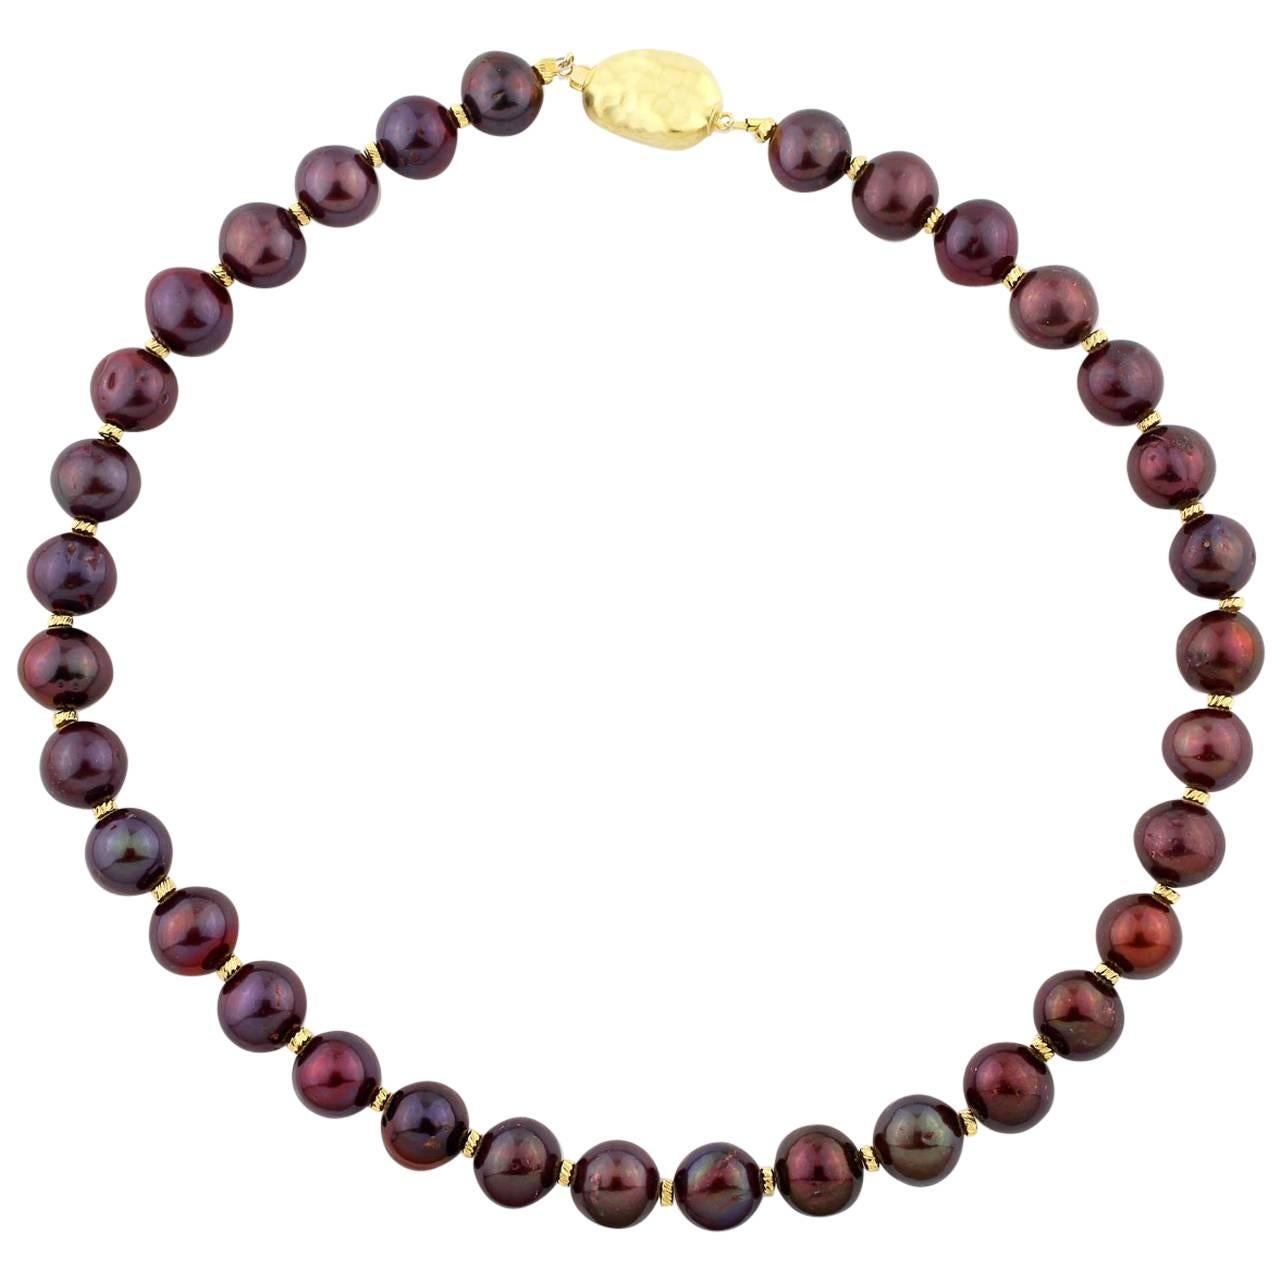 Gemjunky Unique Chocolaty Wine-Colored Cultured Pearl Necklace